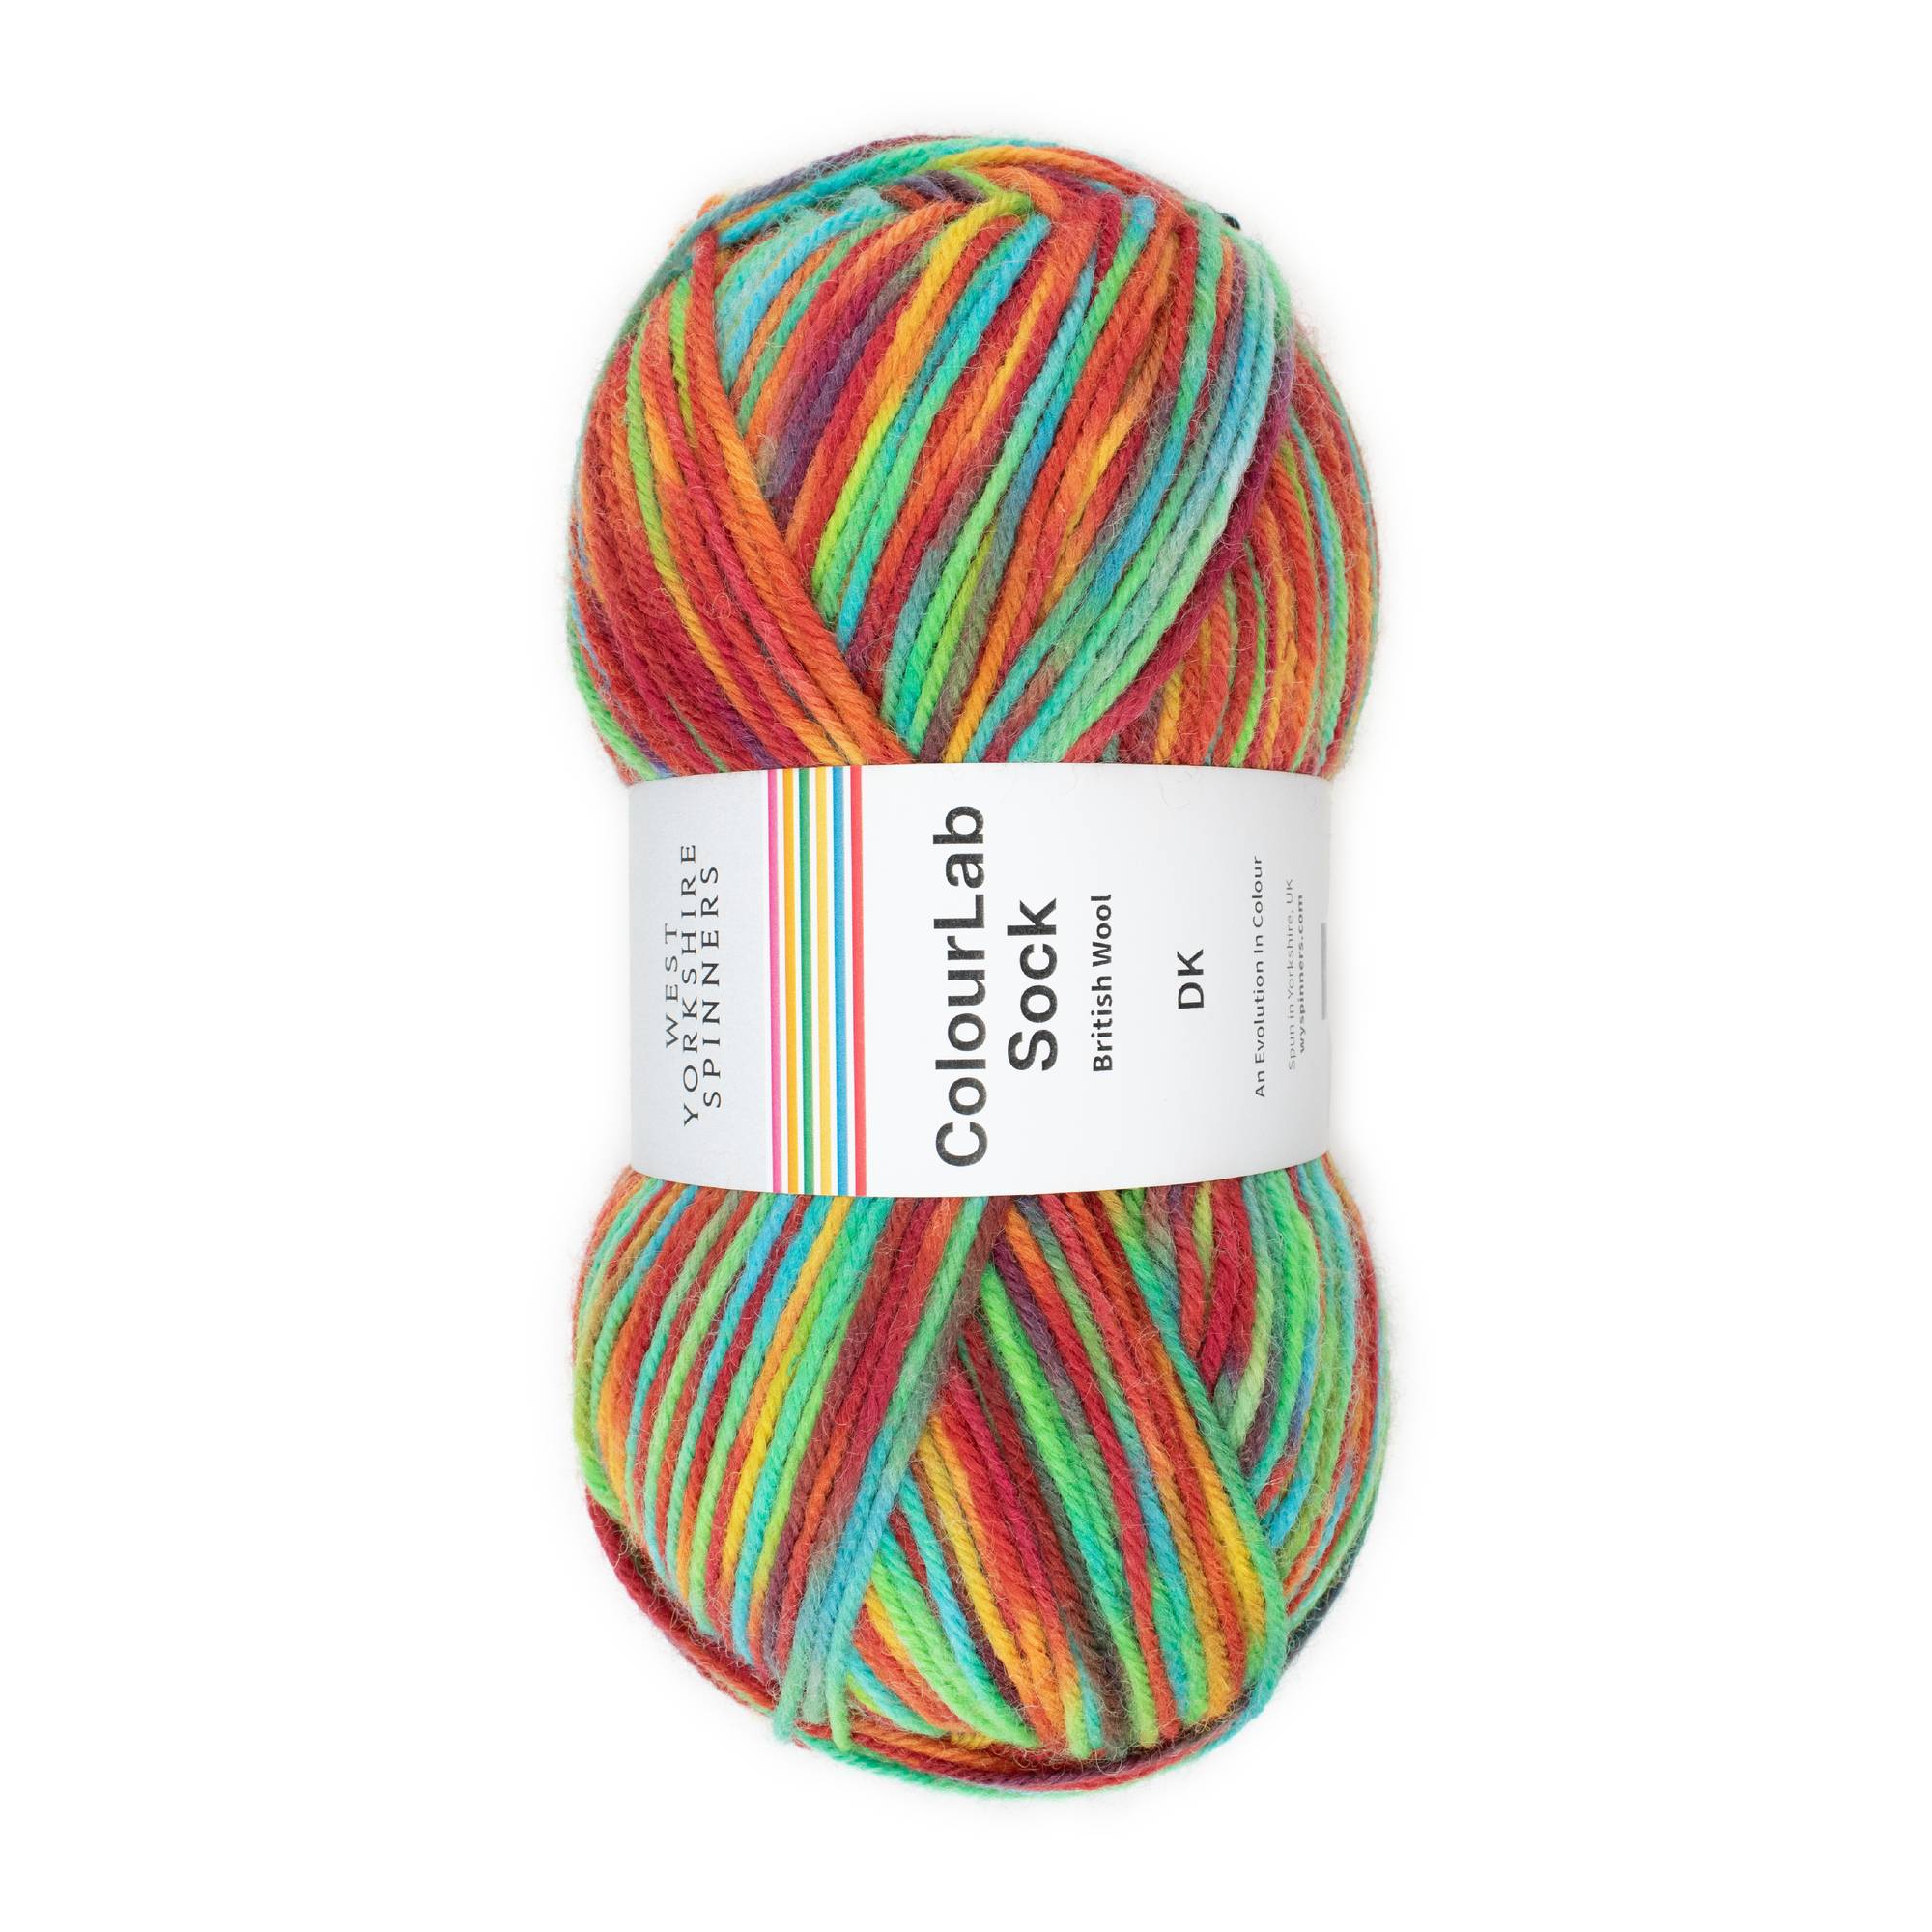 West Yorkshire Spinners Pop ColourLab Sock DK 150g